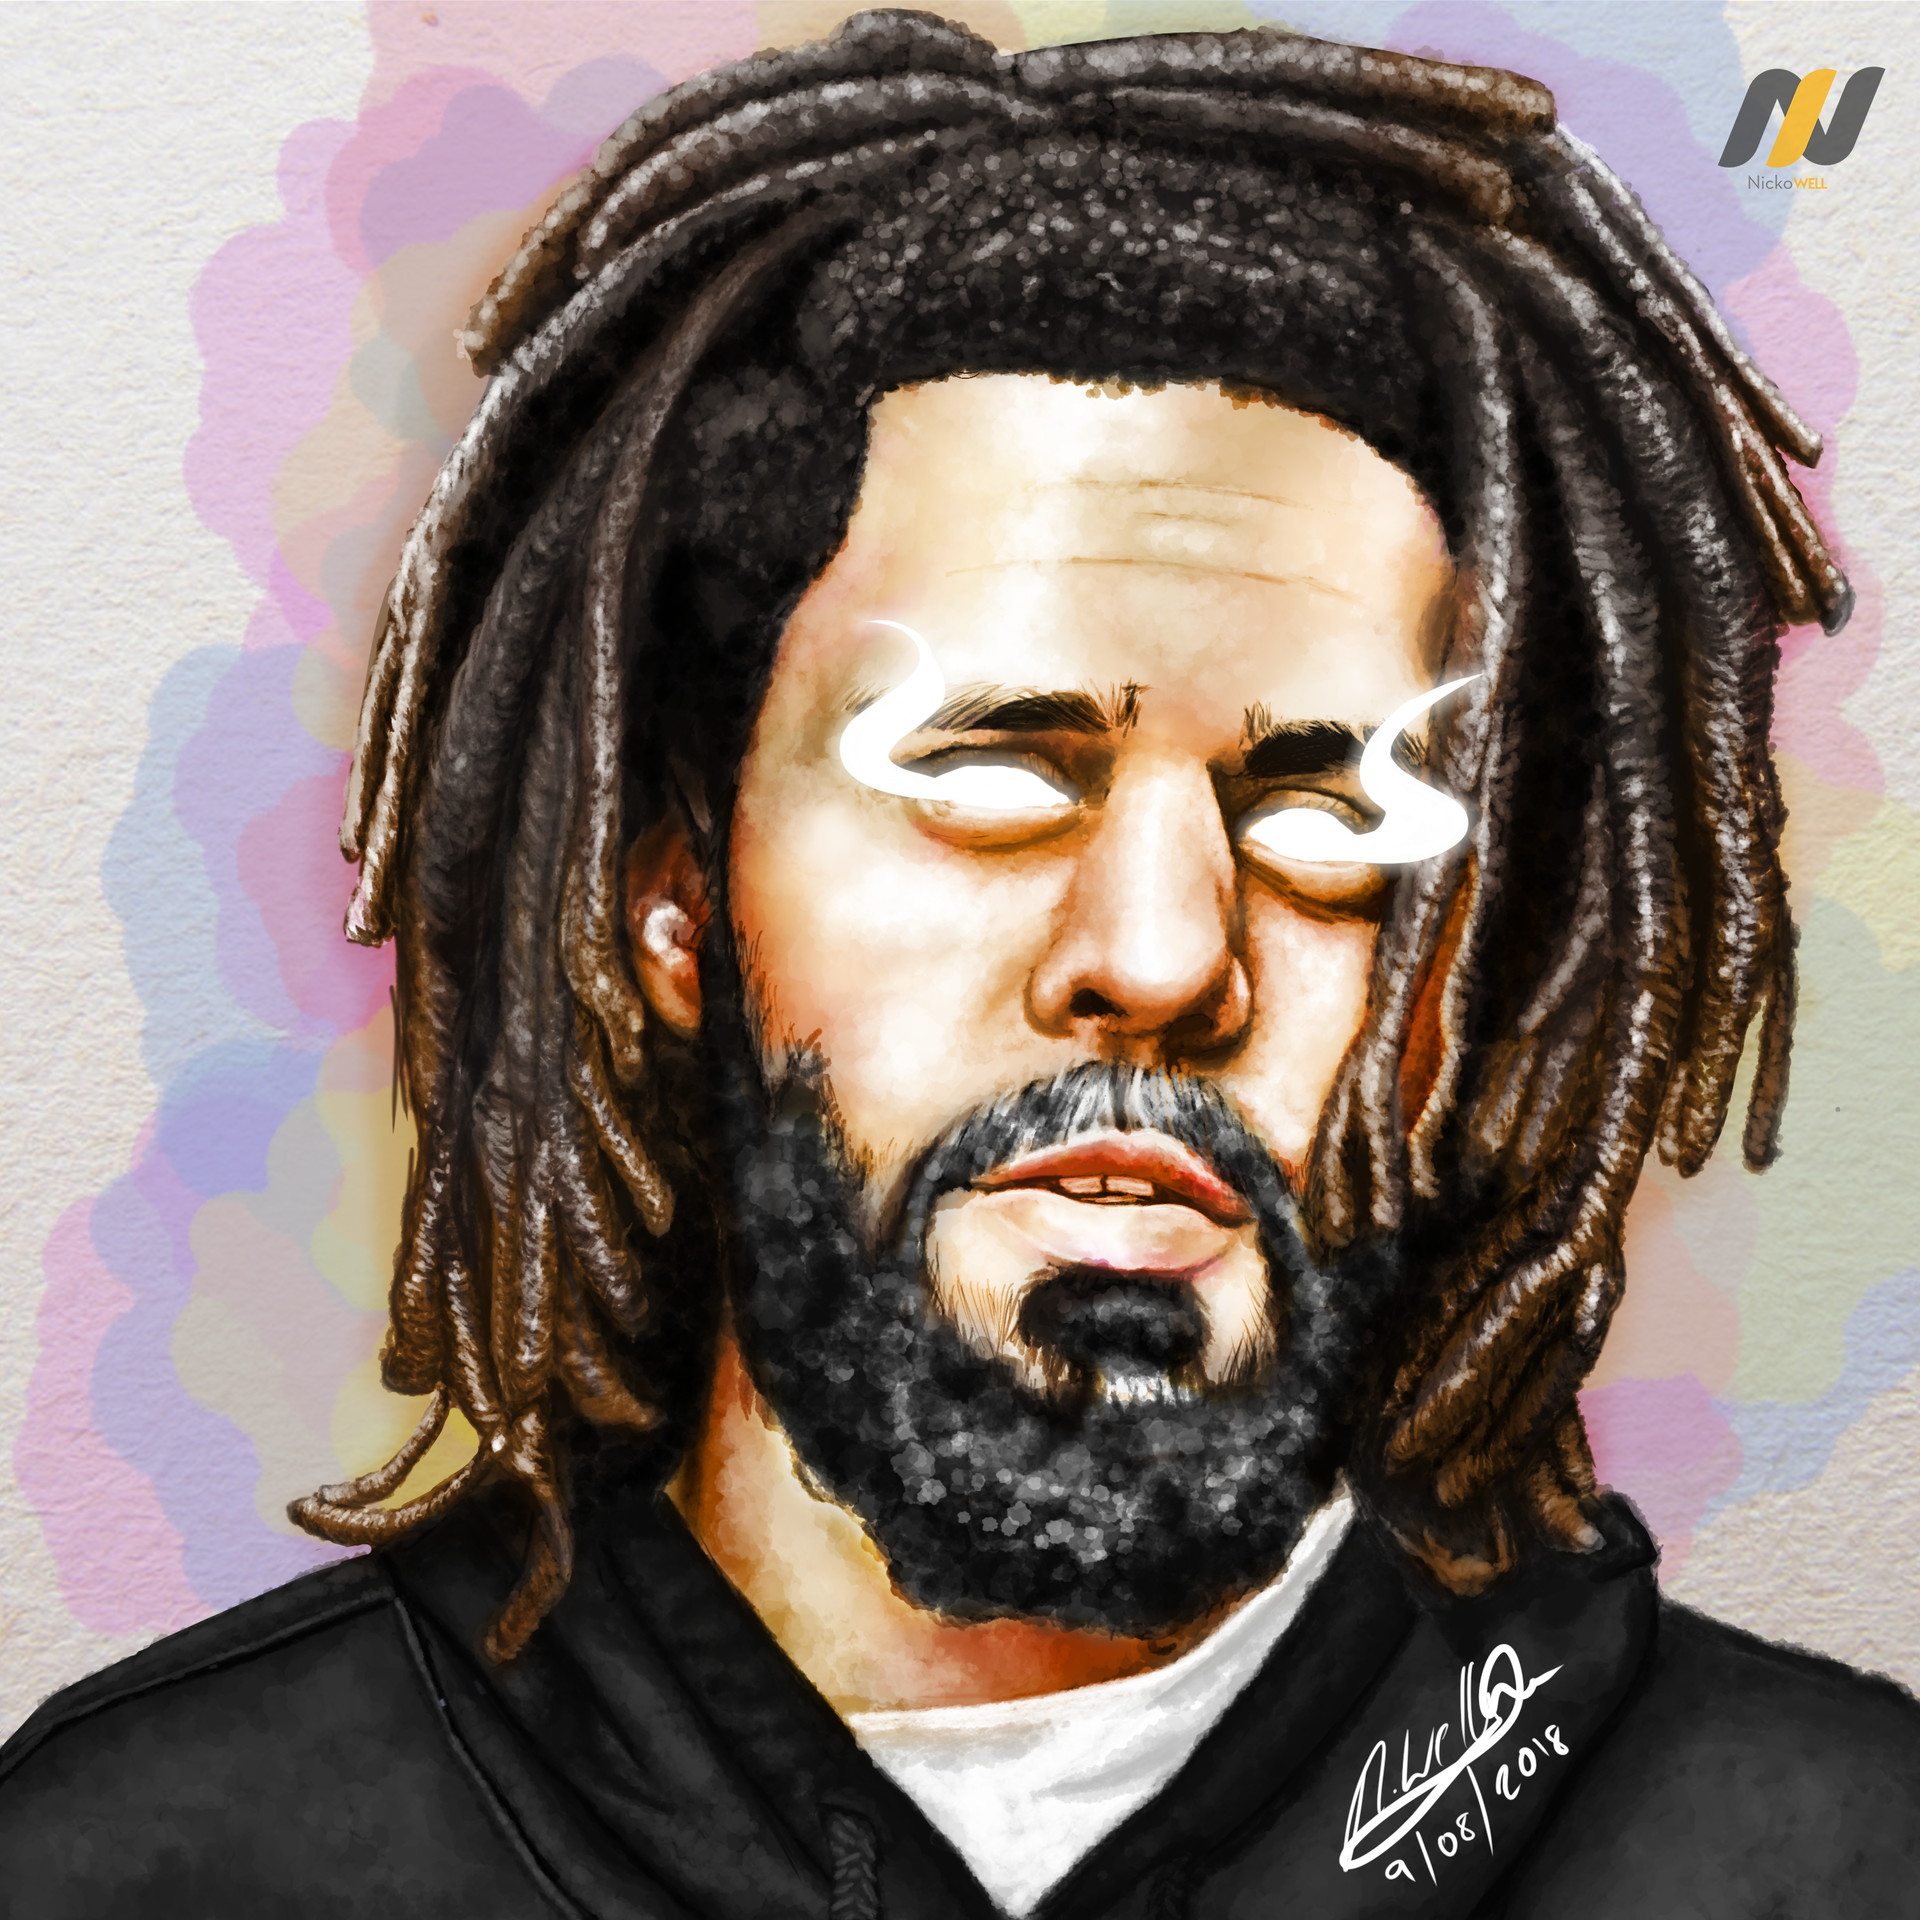 Download J. Cole HD Pictures, Ultra HD Images, And 4k Desktop Wallpapers Here1920 x 1920